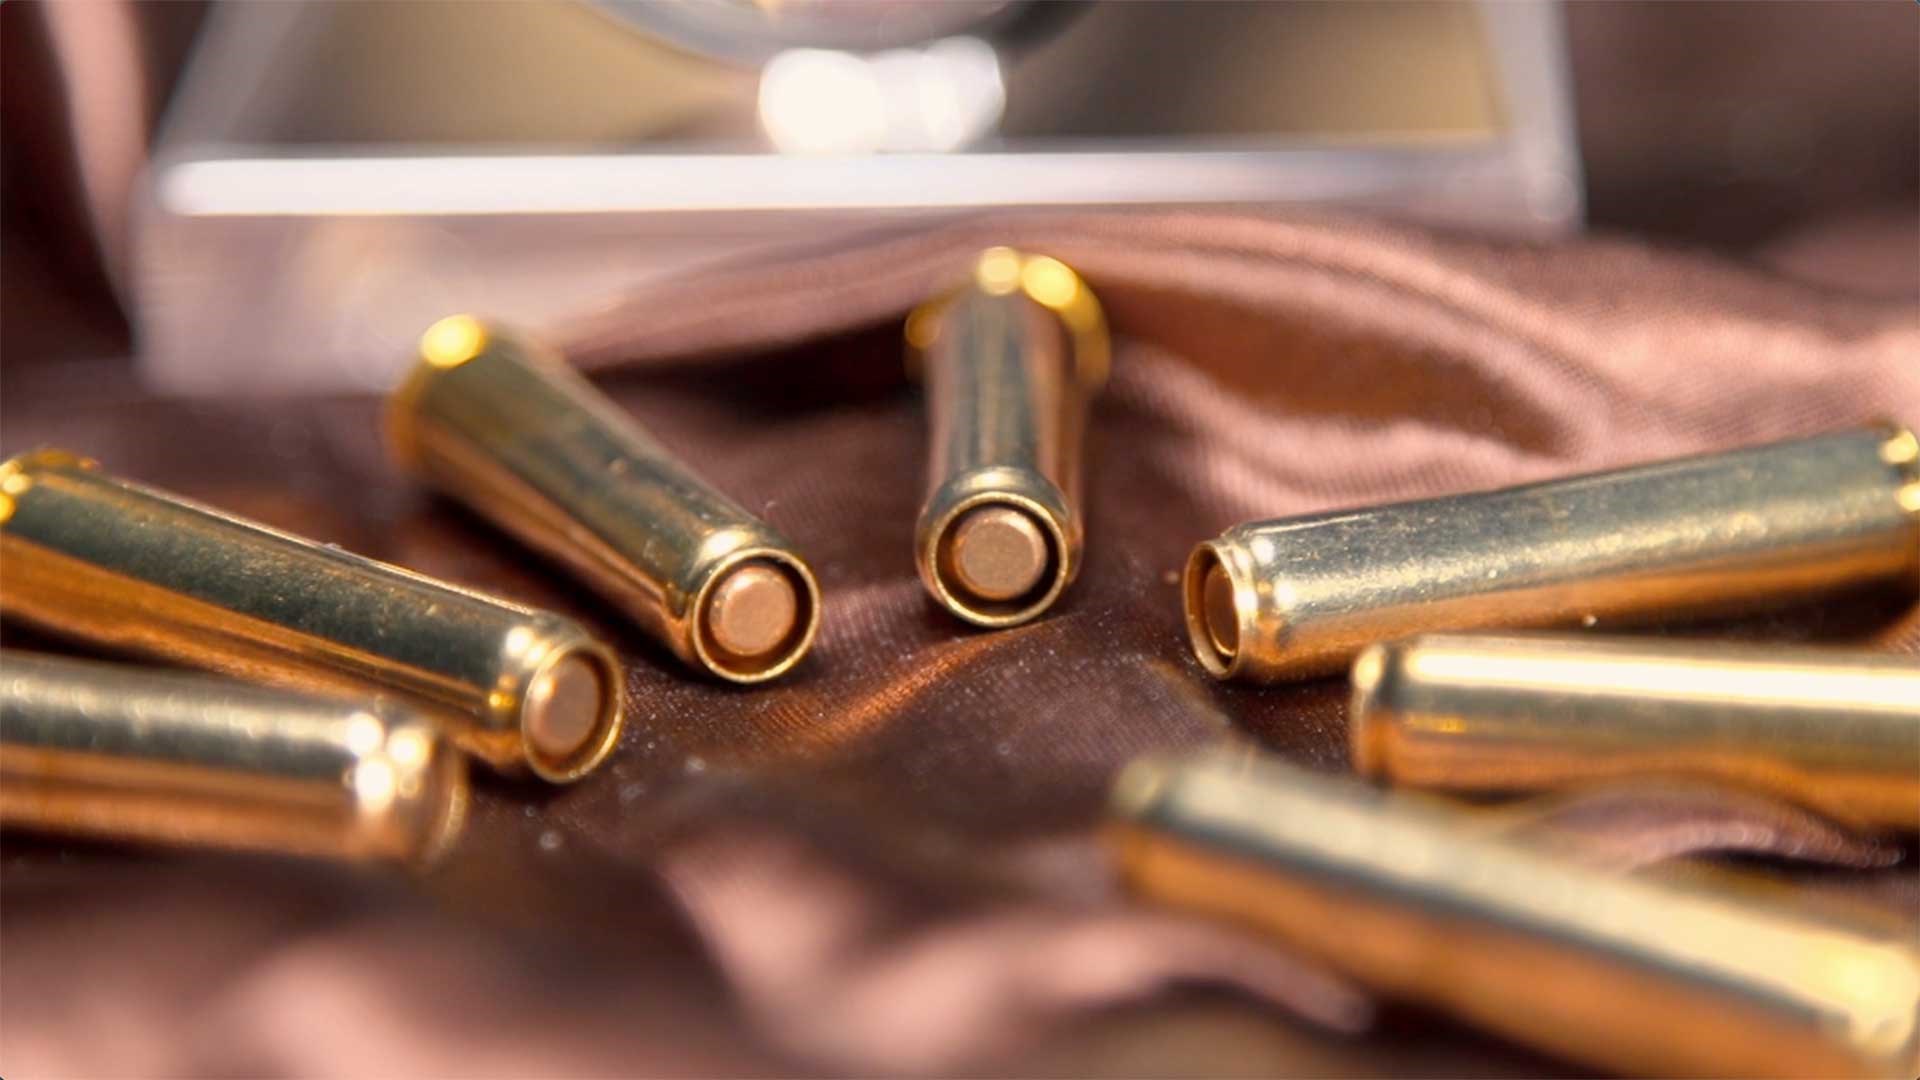 A collection of M1895 Nagant revolver cartridges laid out on a table.